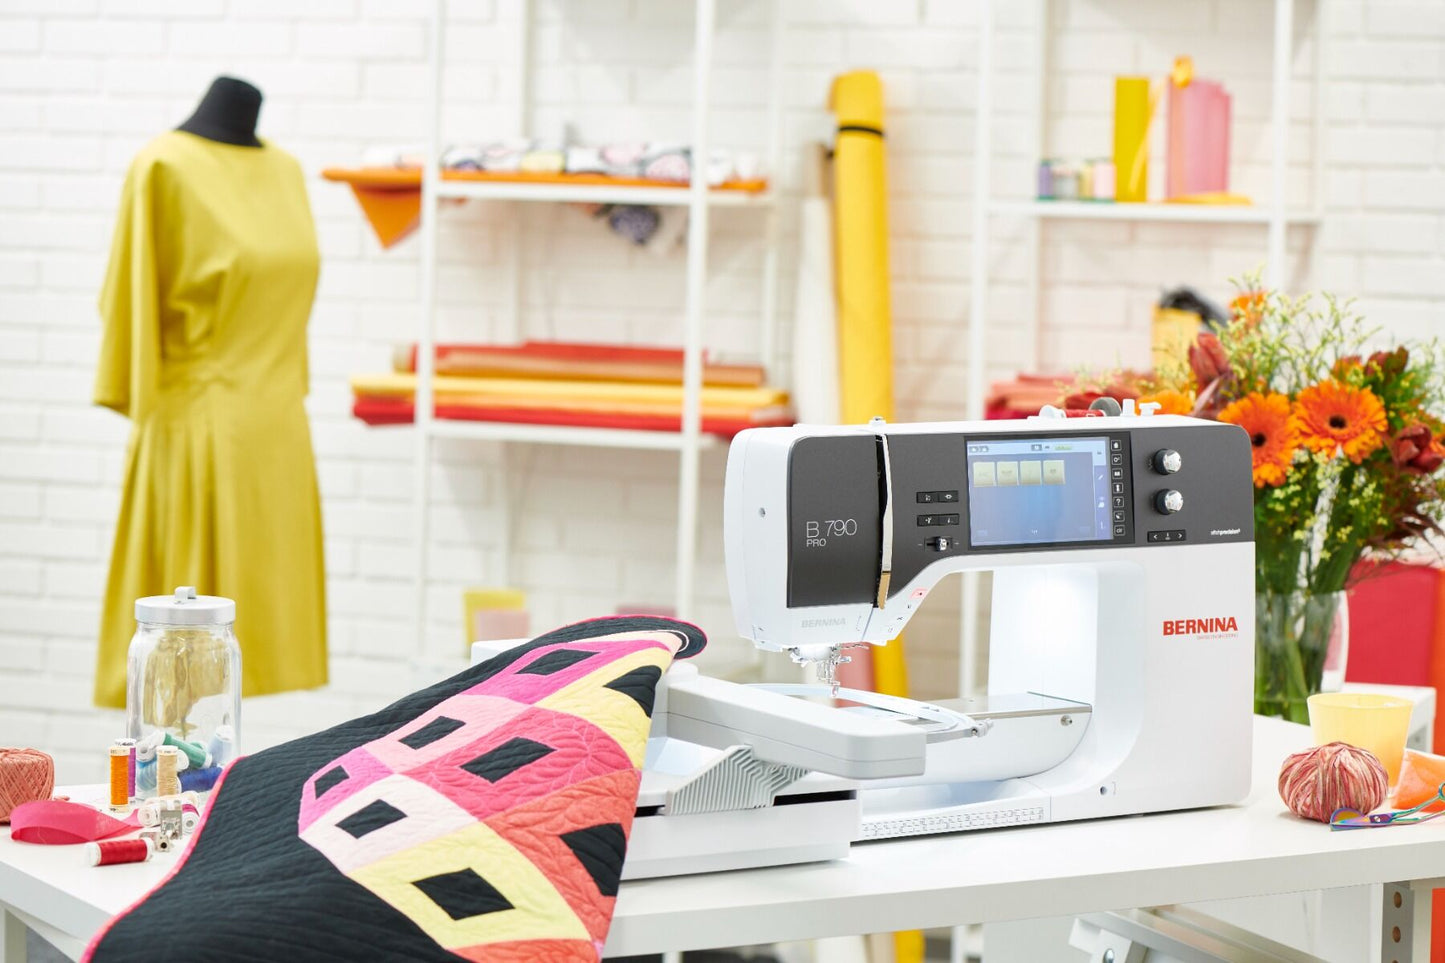 Bernina 790 Pro Sewing, Quilting, & Embroidery Machine with FREE Gifts (23GWP.790 + 107410.70.00 + 106681.70.00)